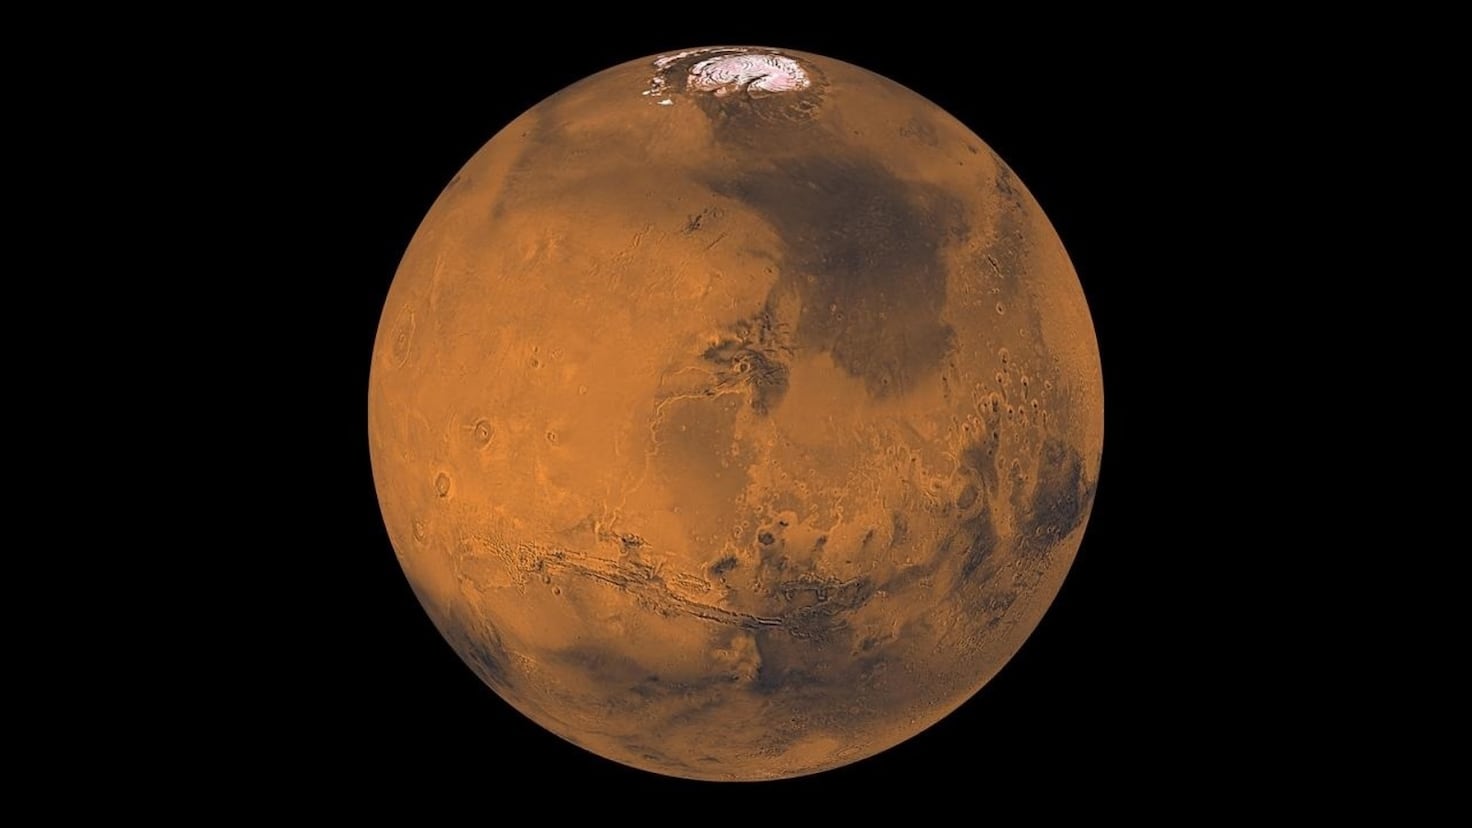 Finding about methane on Mars
